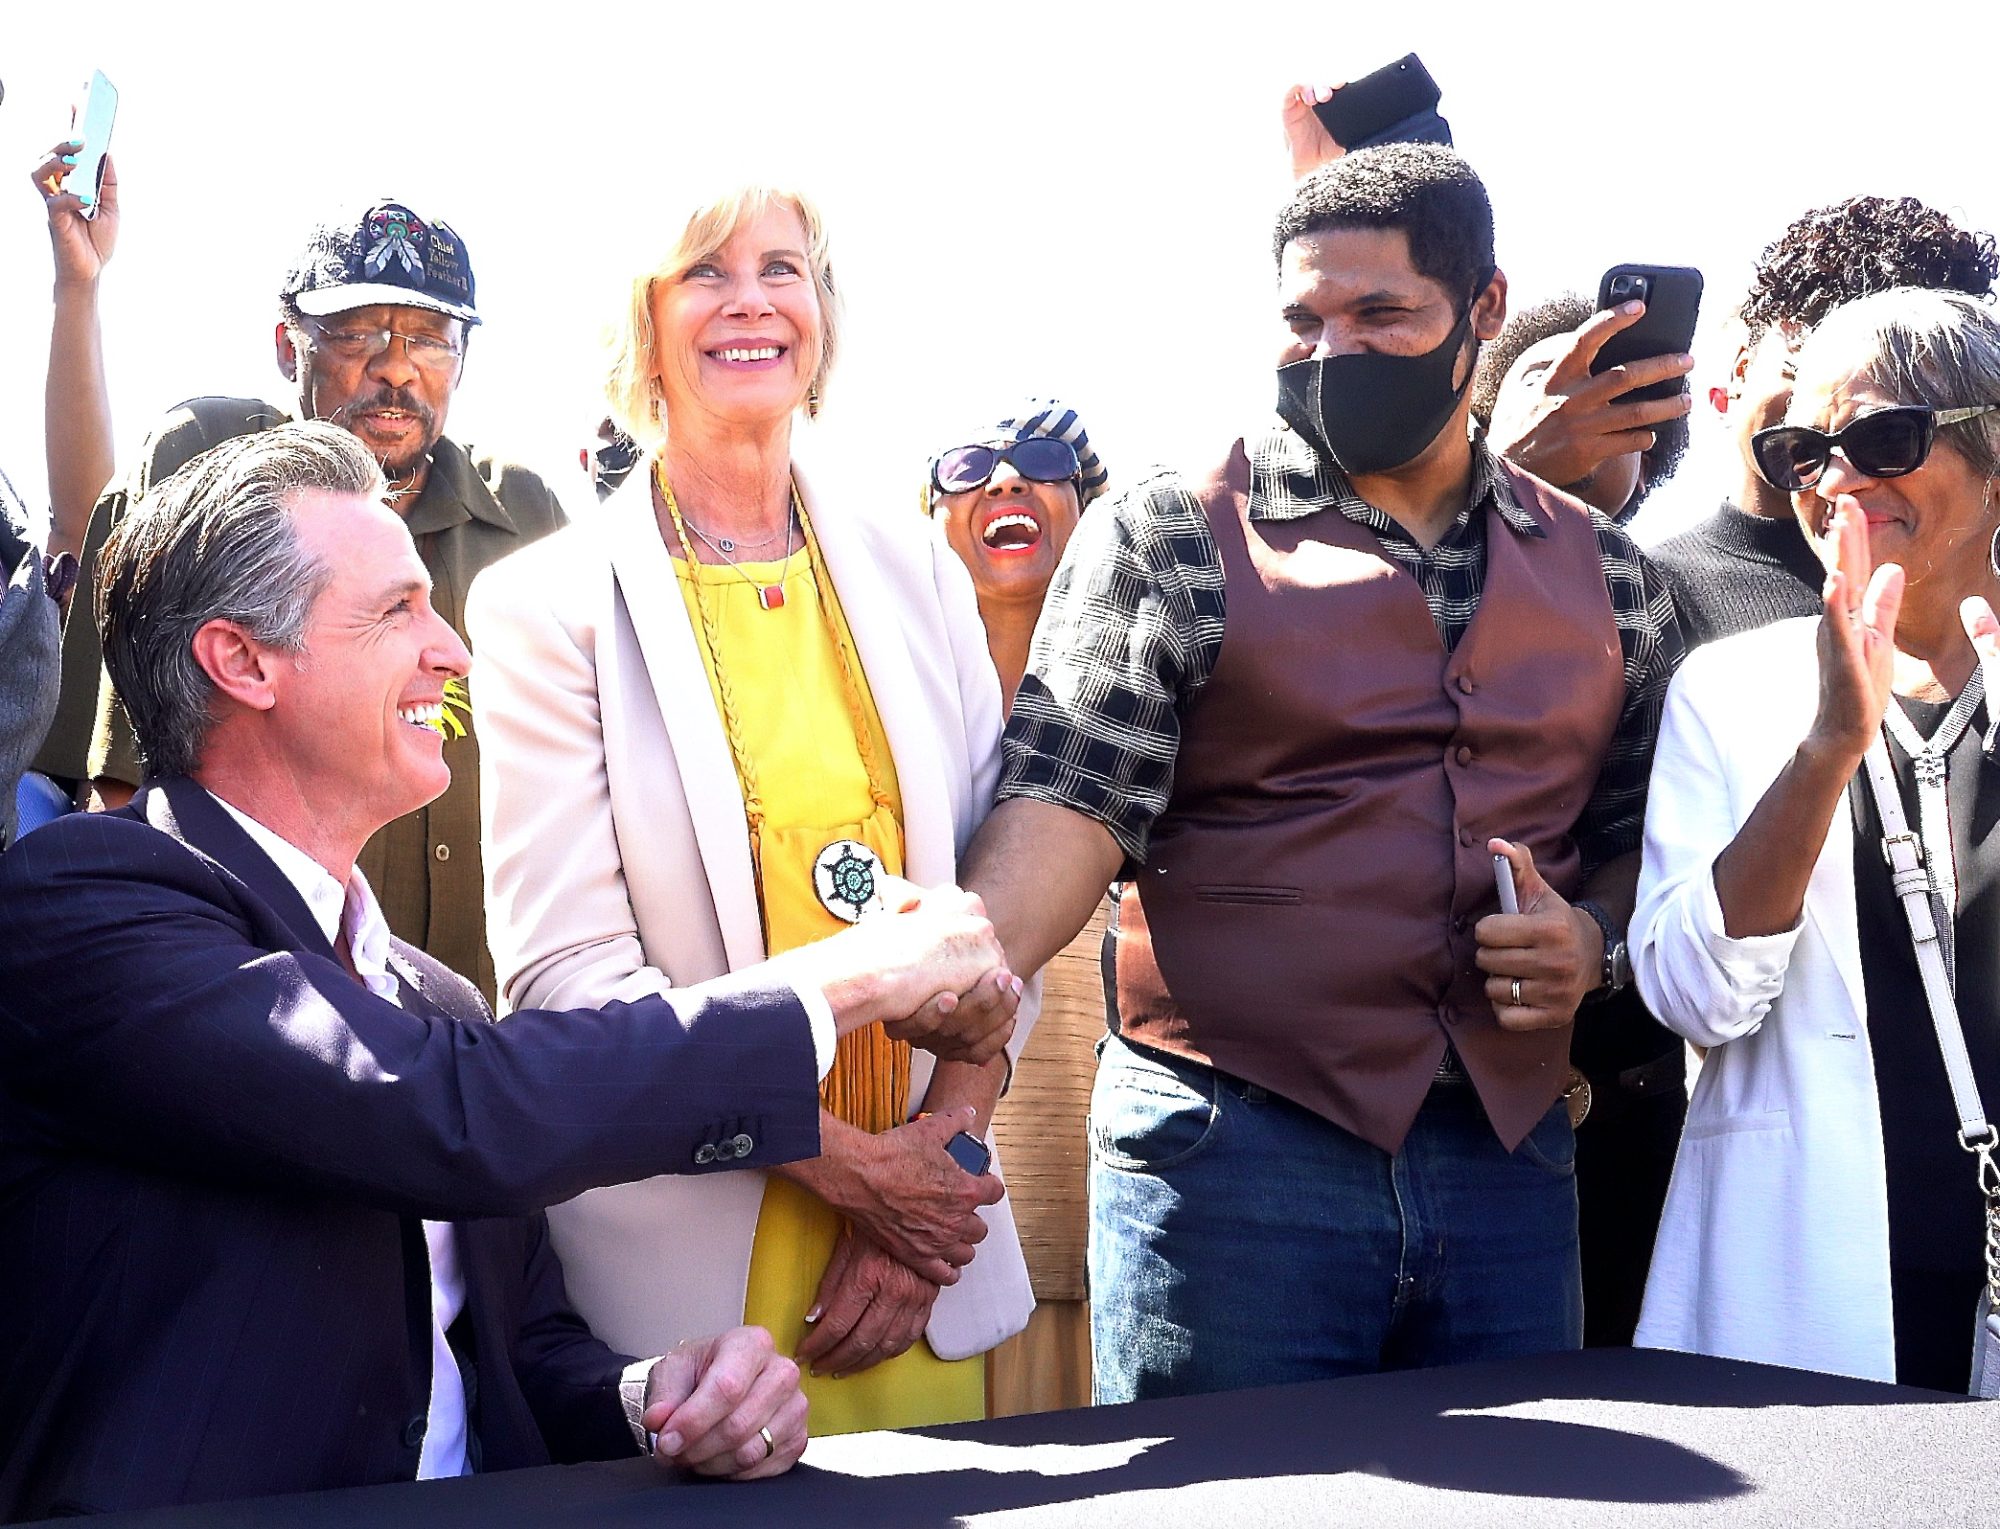 At the signing event, Newsom shakes hands with Anthony Bruce, descendant of the original owners of Bruce's Beach. Looking on are State Sen. Steven Bradford and County Supv. Janice Hahn. (E. Mesiyah McGinnis/L.A. Sentinel)